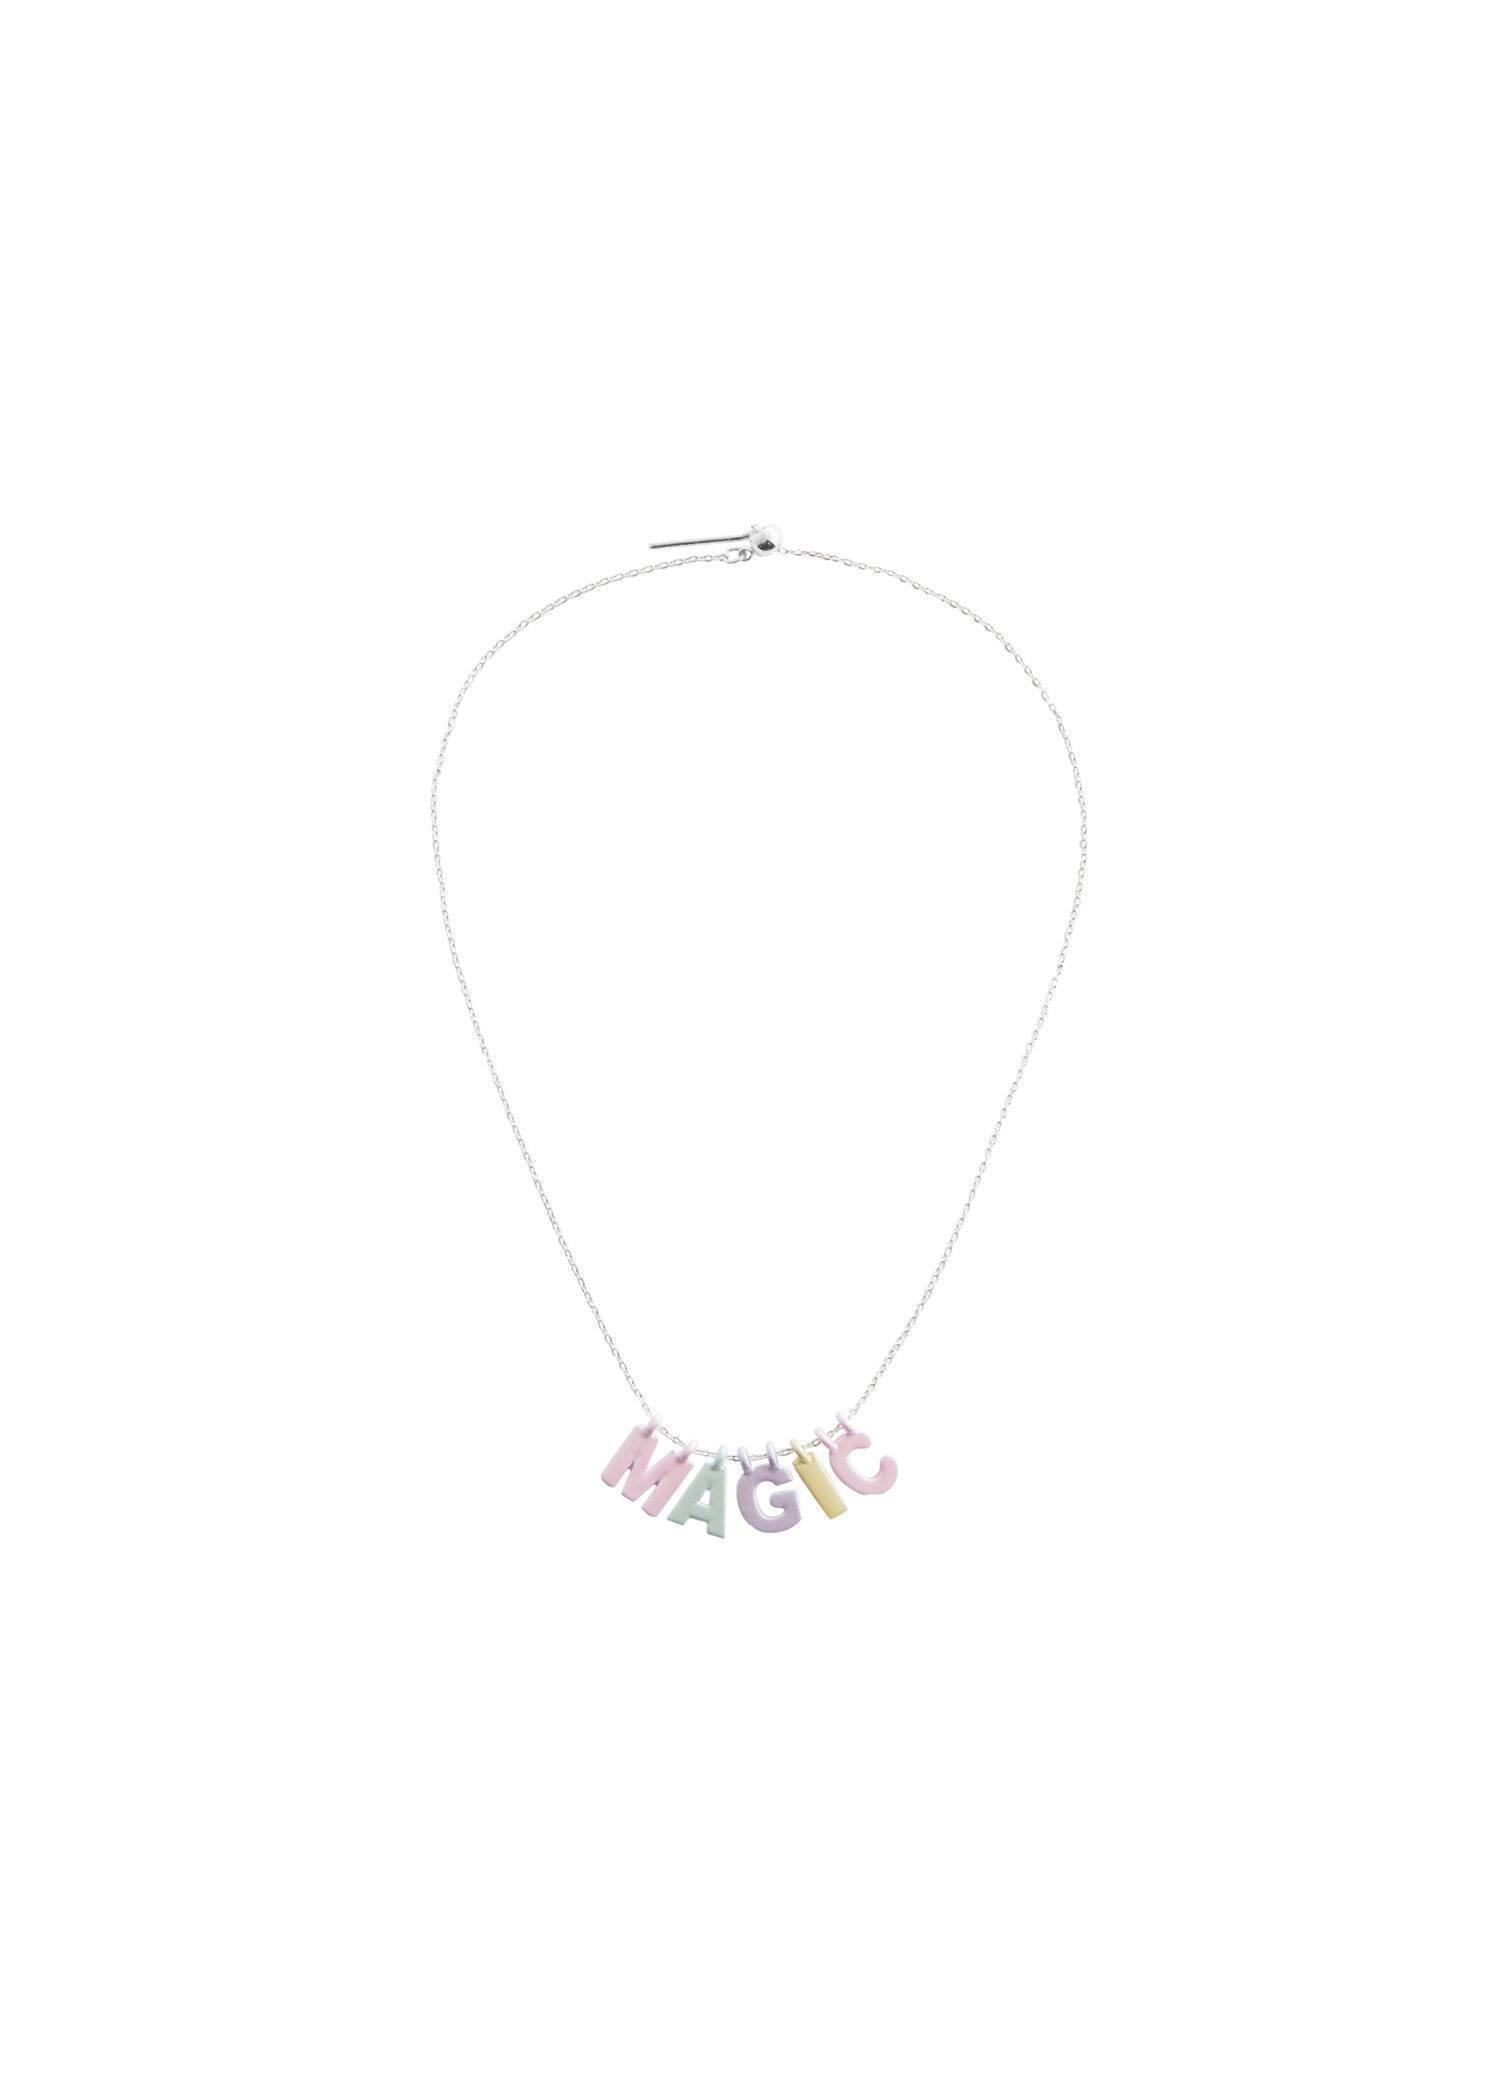 Mango - Silver Letters Bead Necklace, Kids Girls